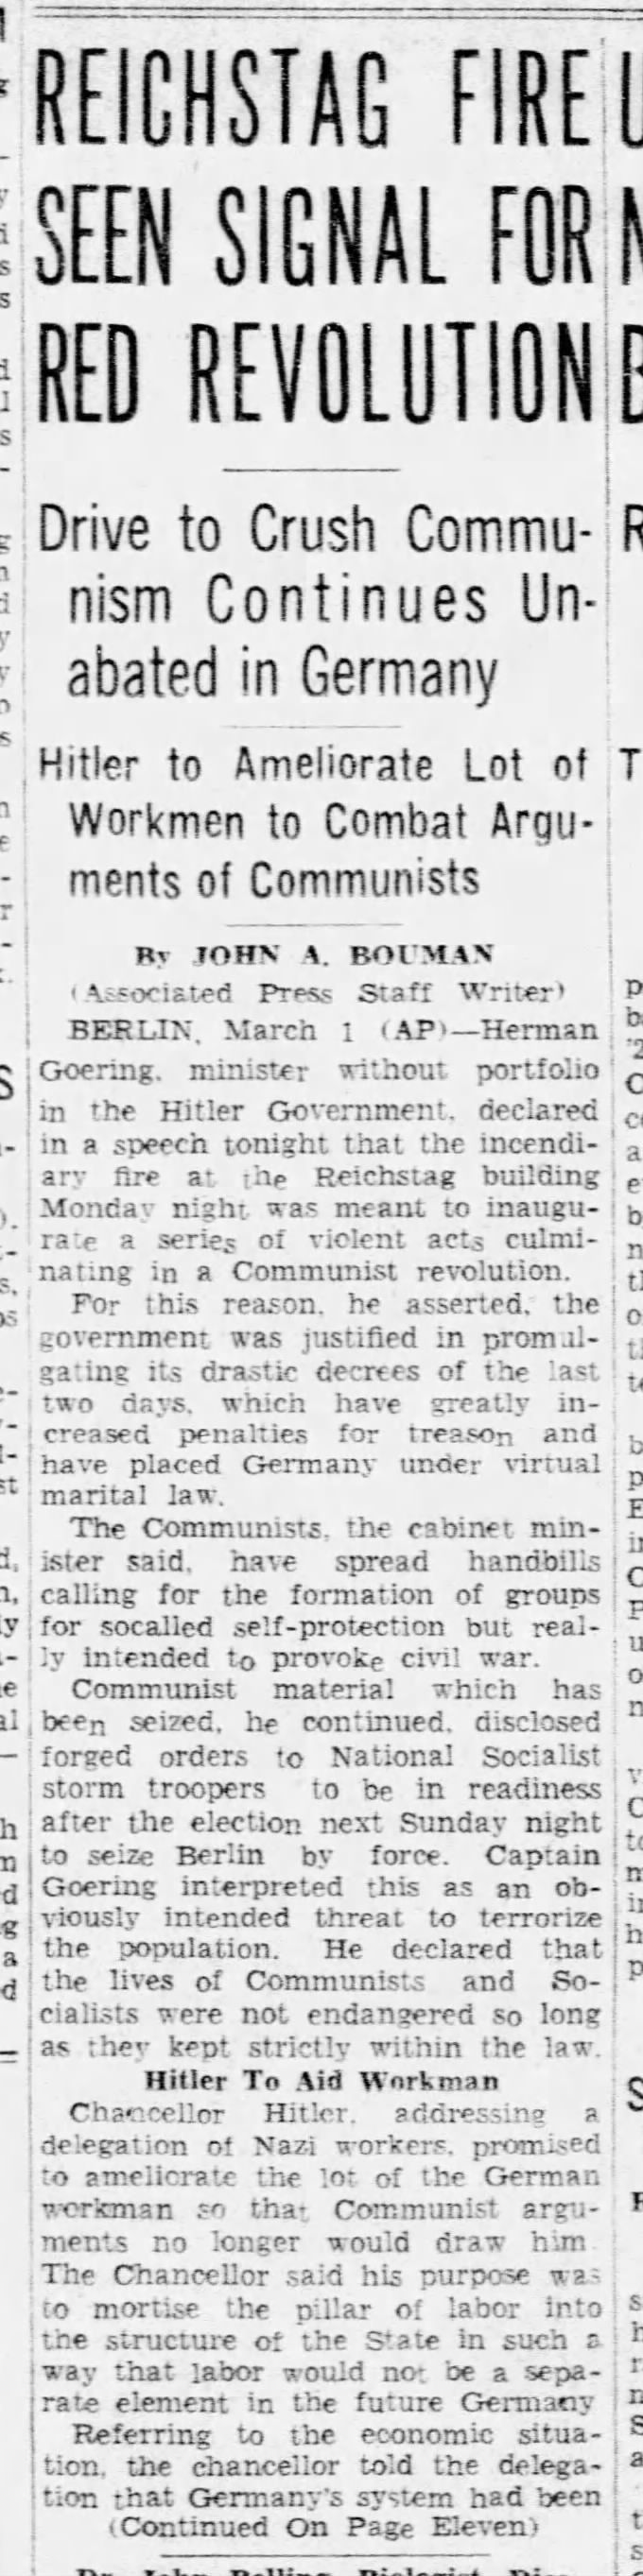 Reichstag Fire Seen Signal For Red Revolution